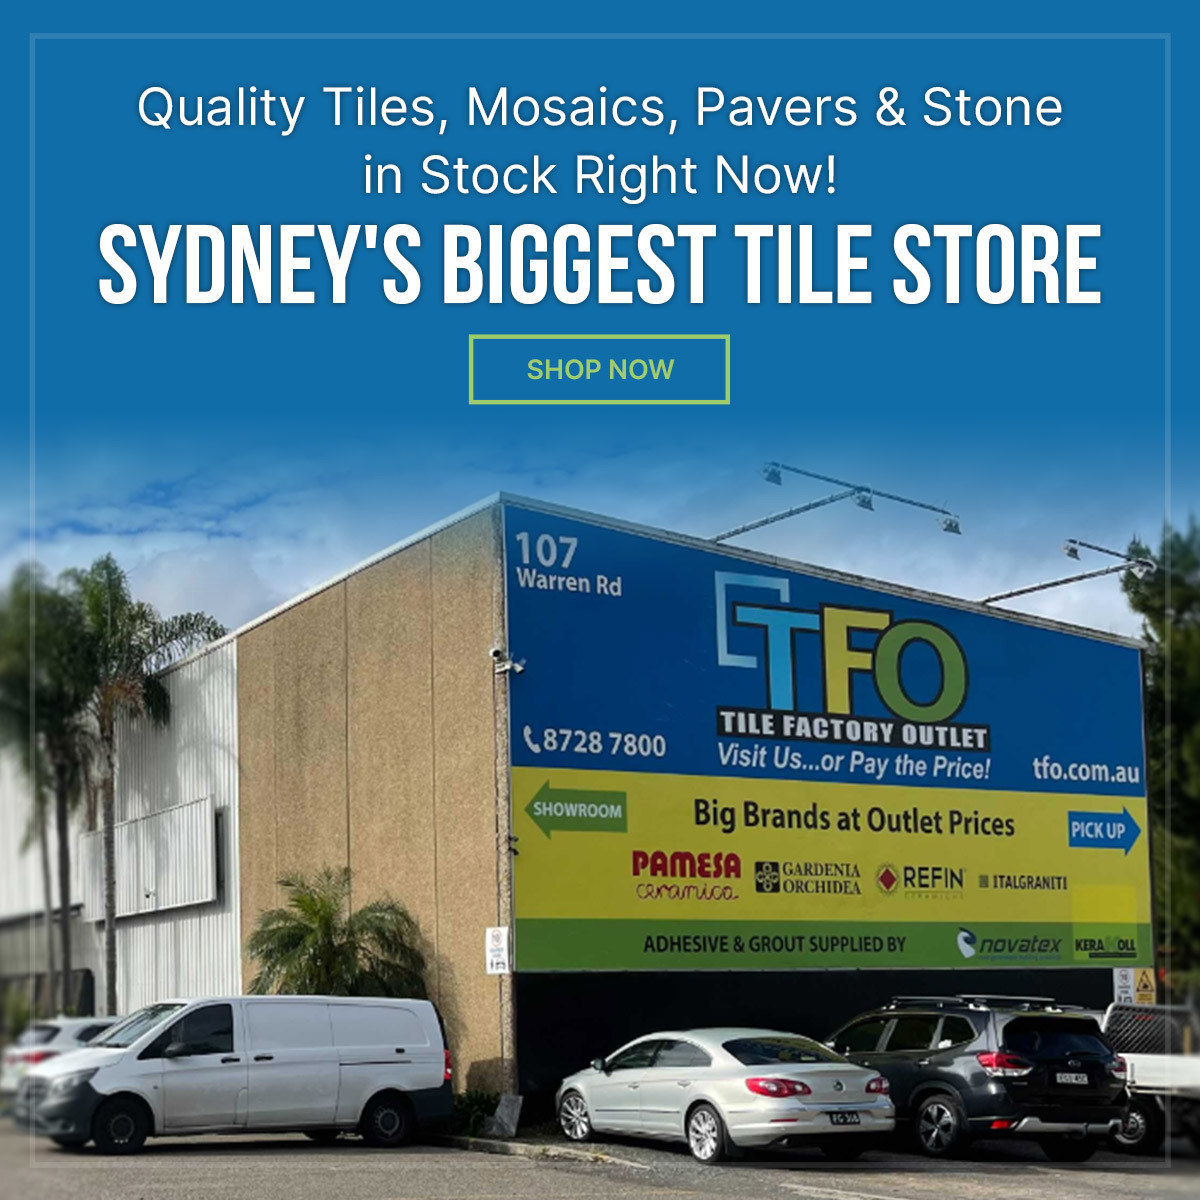 Buying Floor Tiles Canberra – The Way To Go